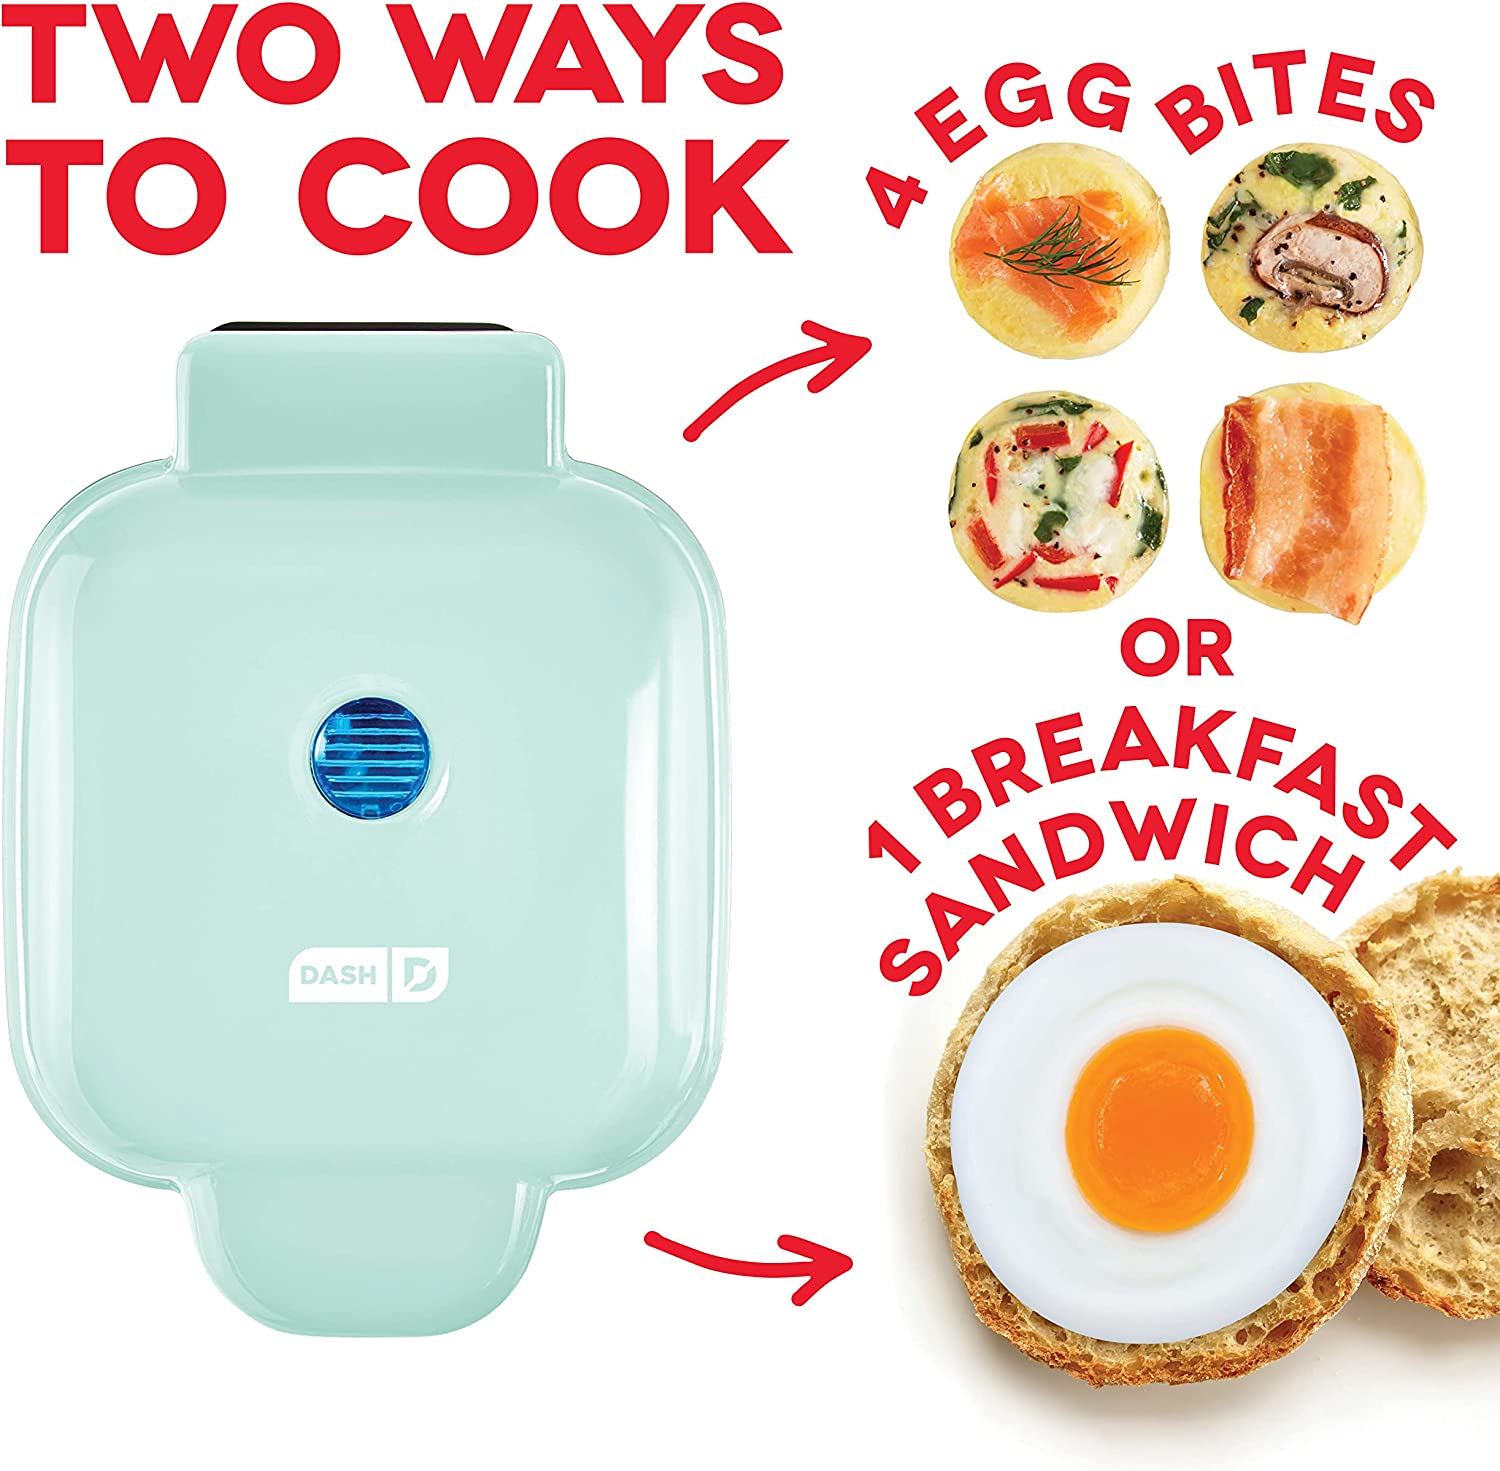 Make delicious egg bites and sandwiches at home in just 10 minutes